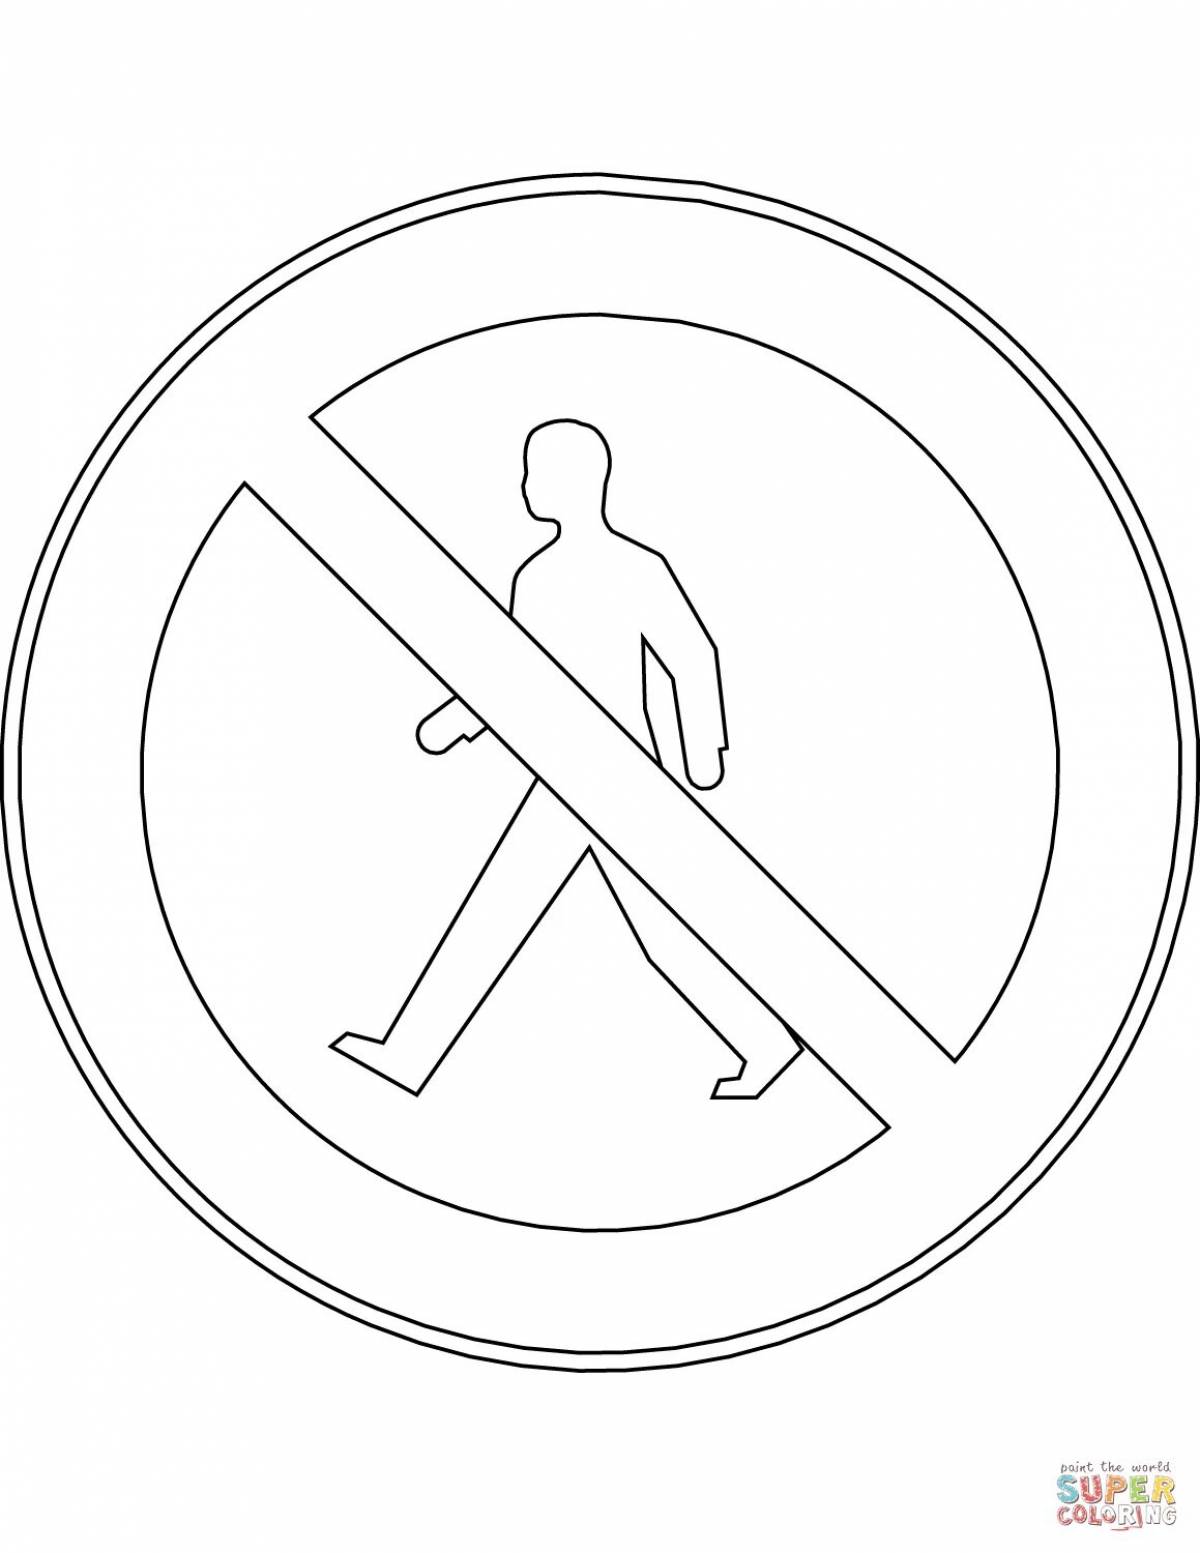 Coloring page attractive safety sign